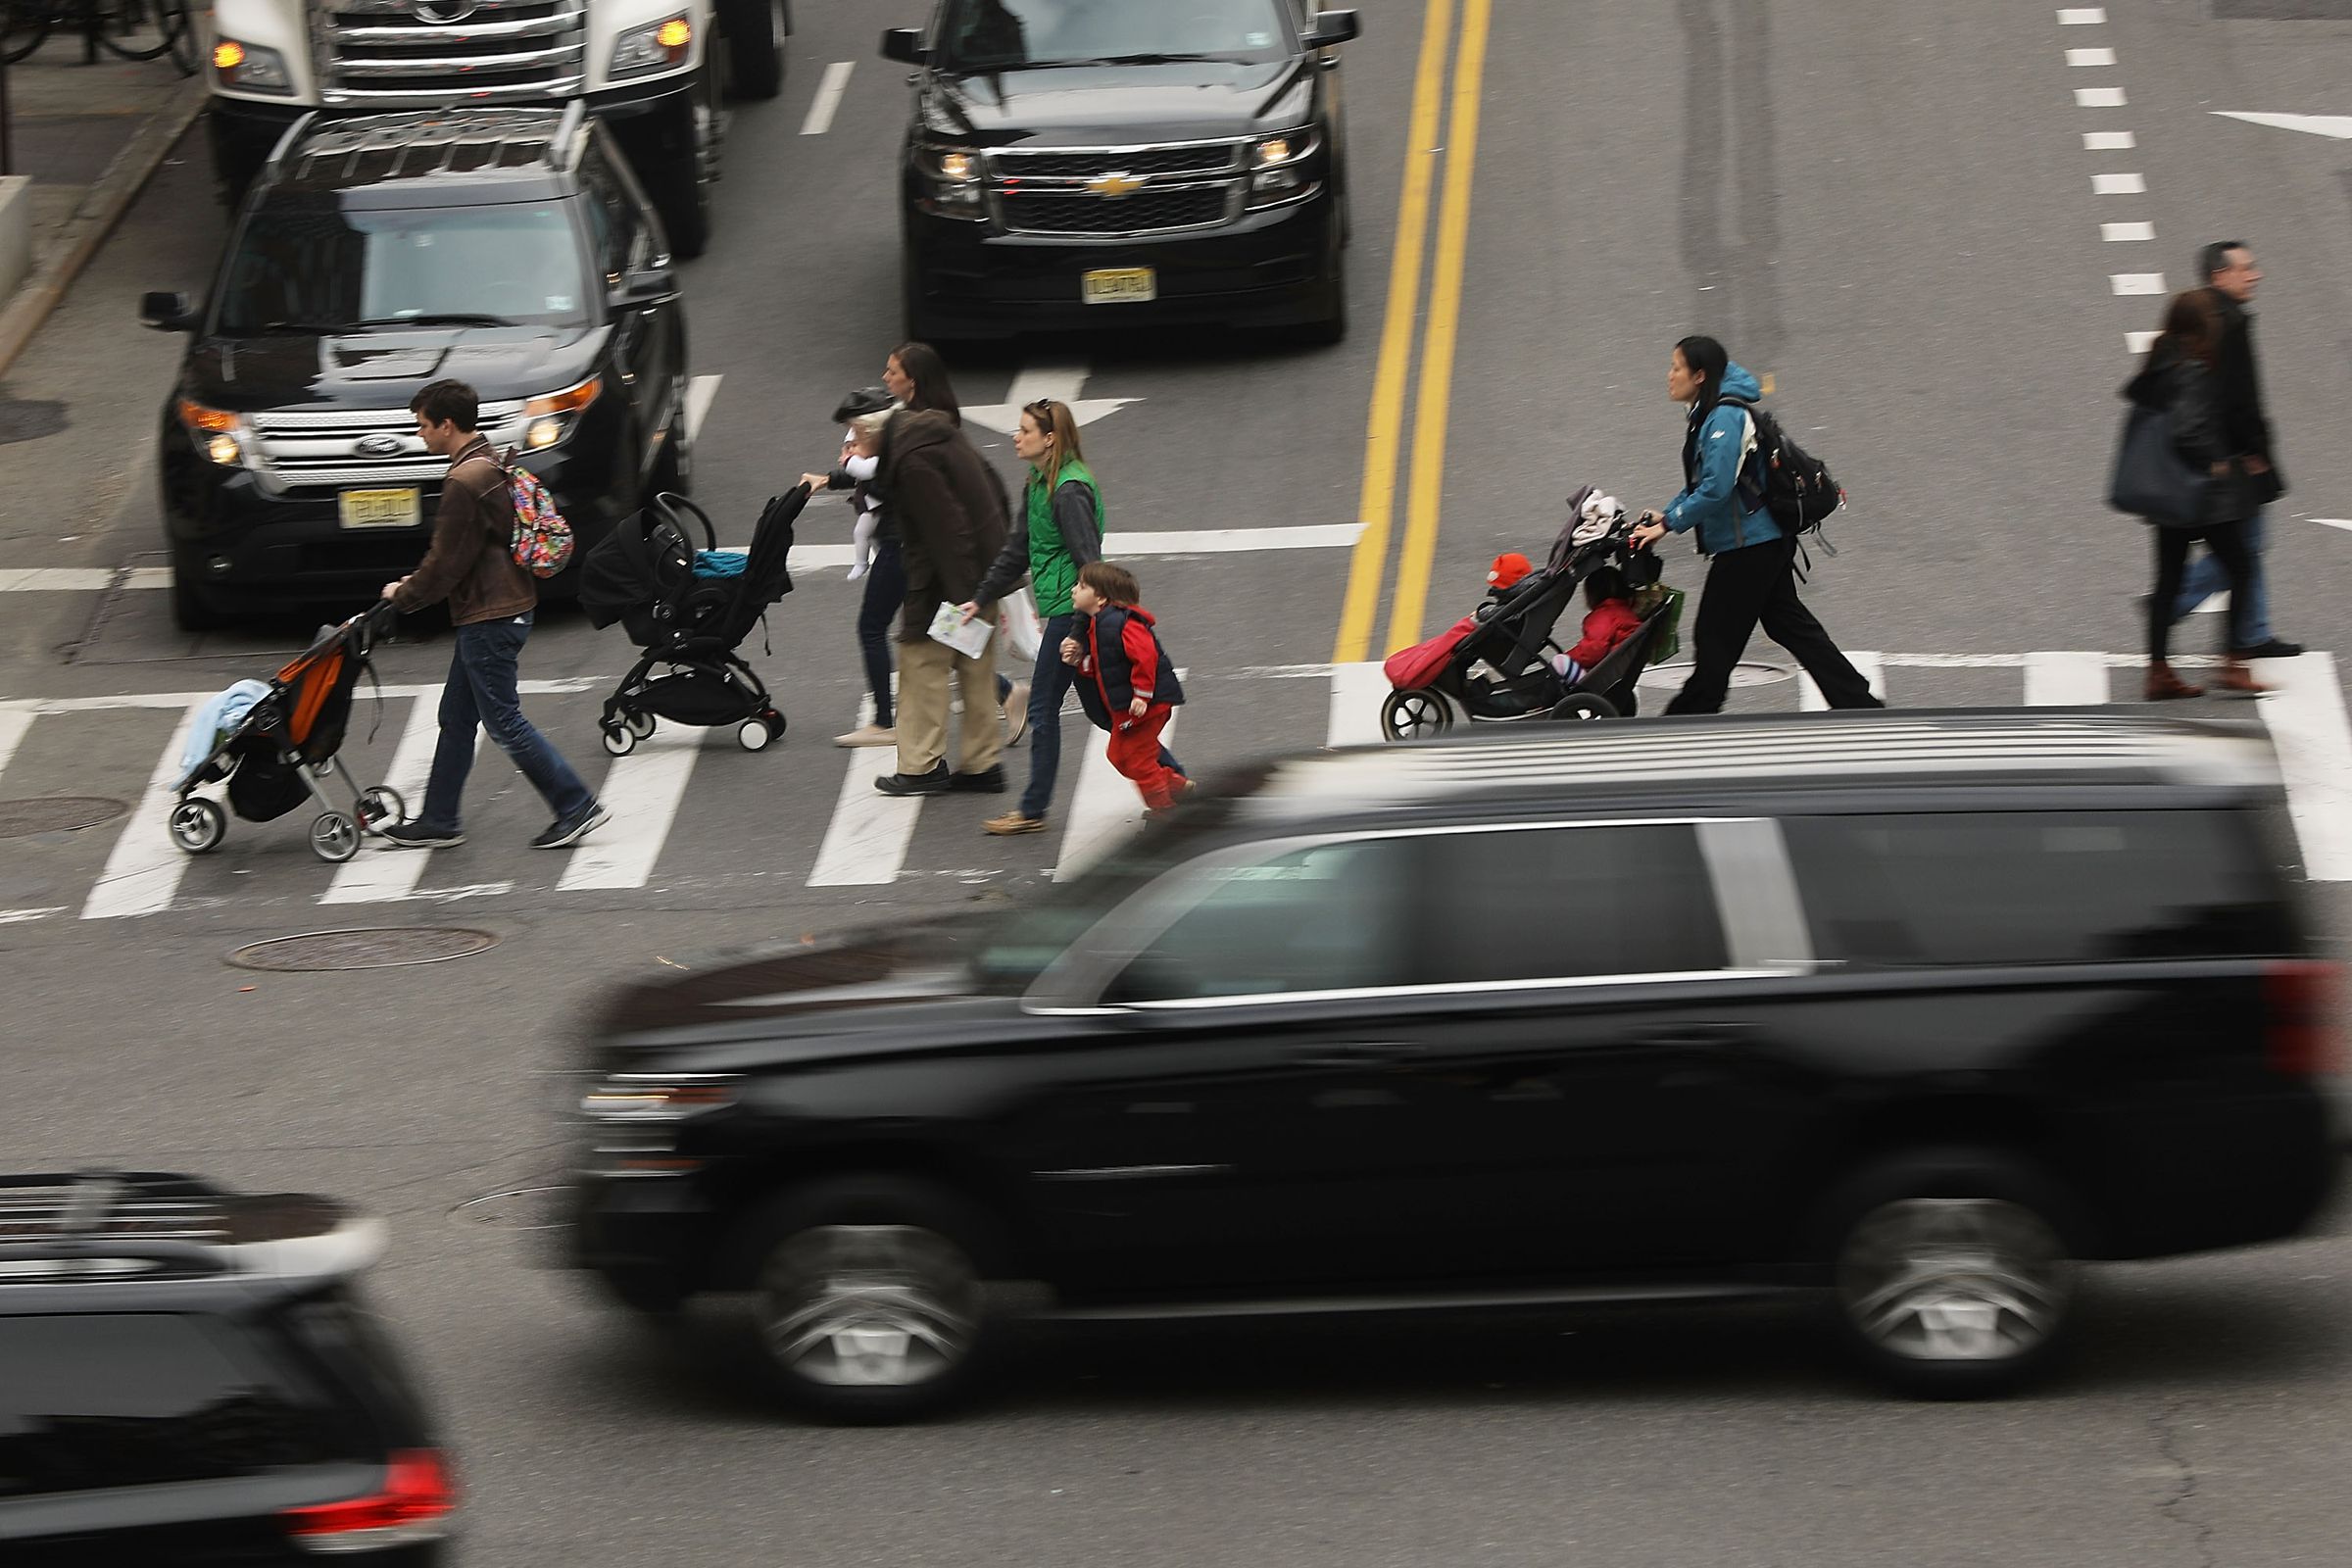 Pedestrian Deaths Rise In 2016 Nationally In The U.S.